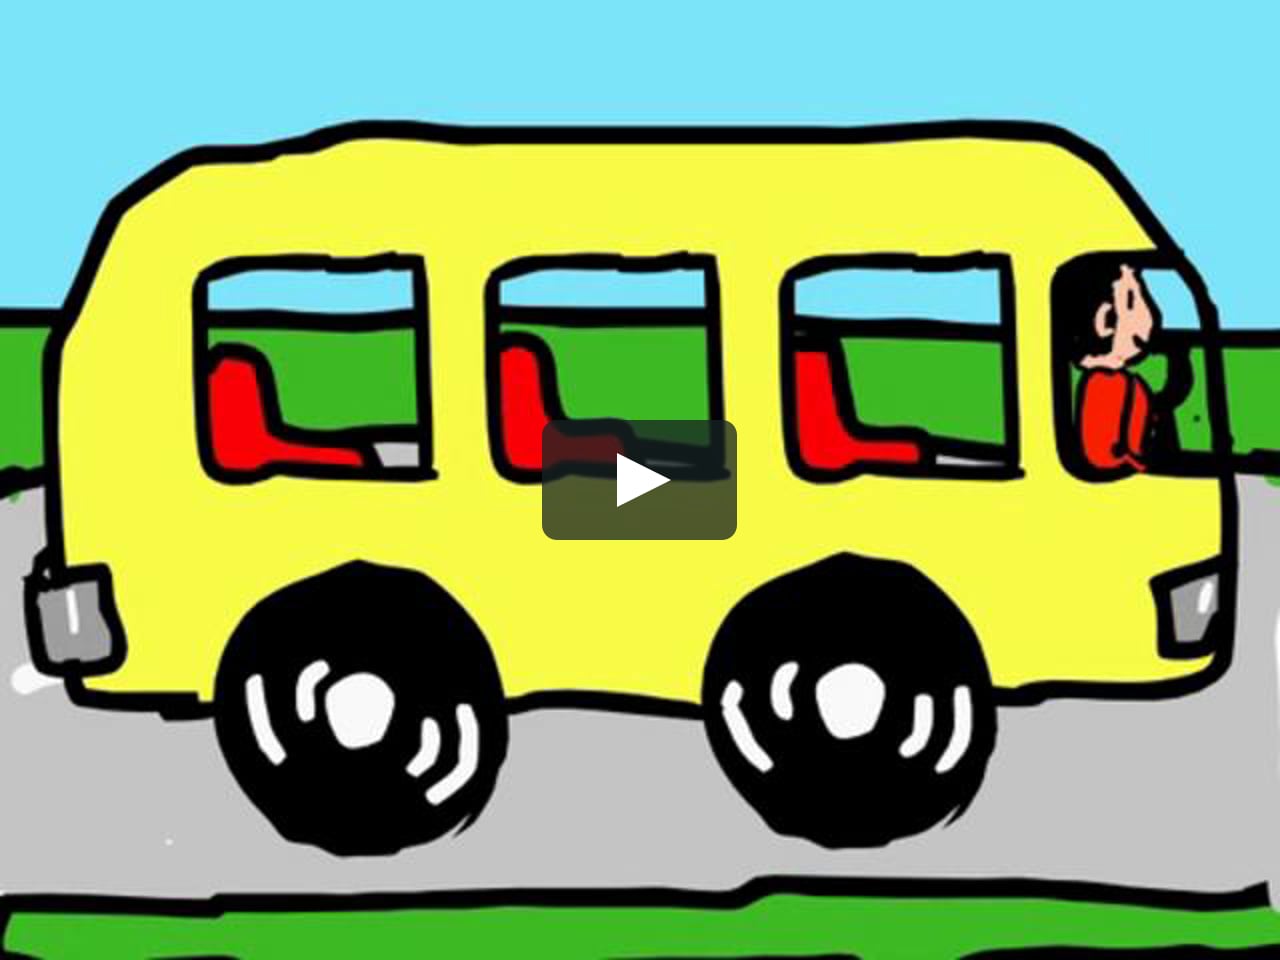 The Wheels on the Bus in circle on Vimeo